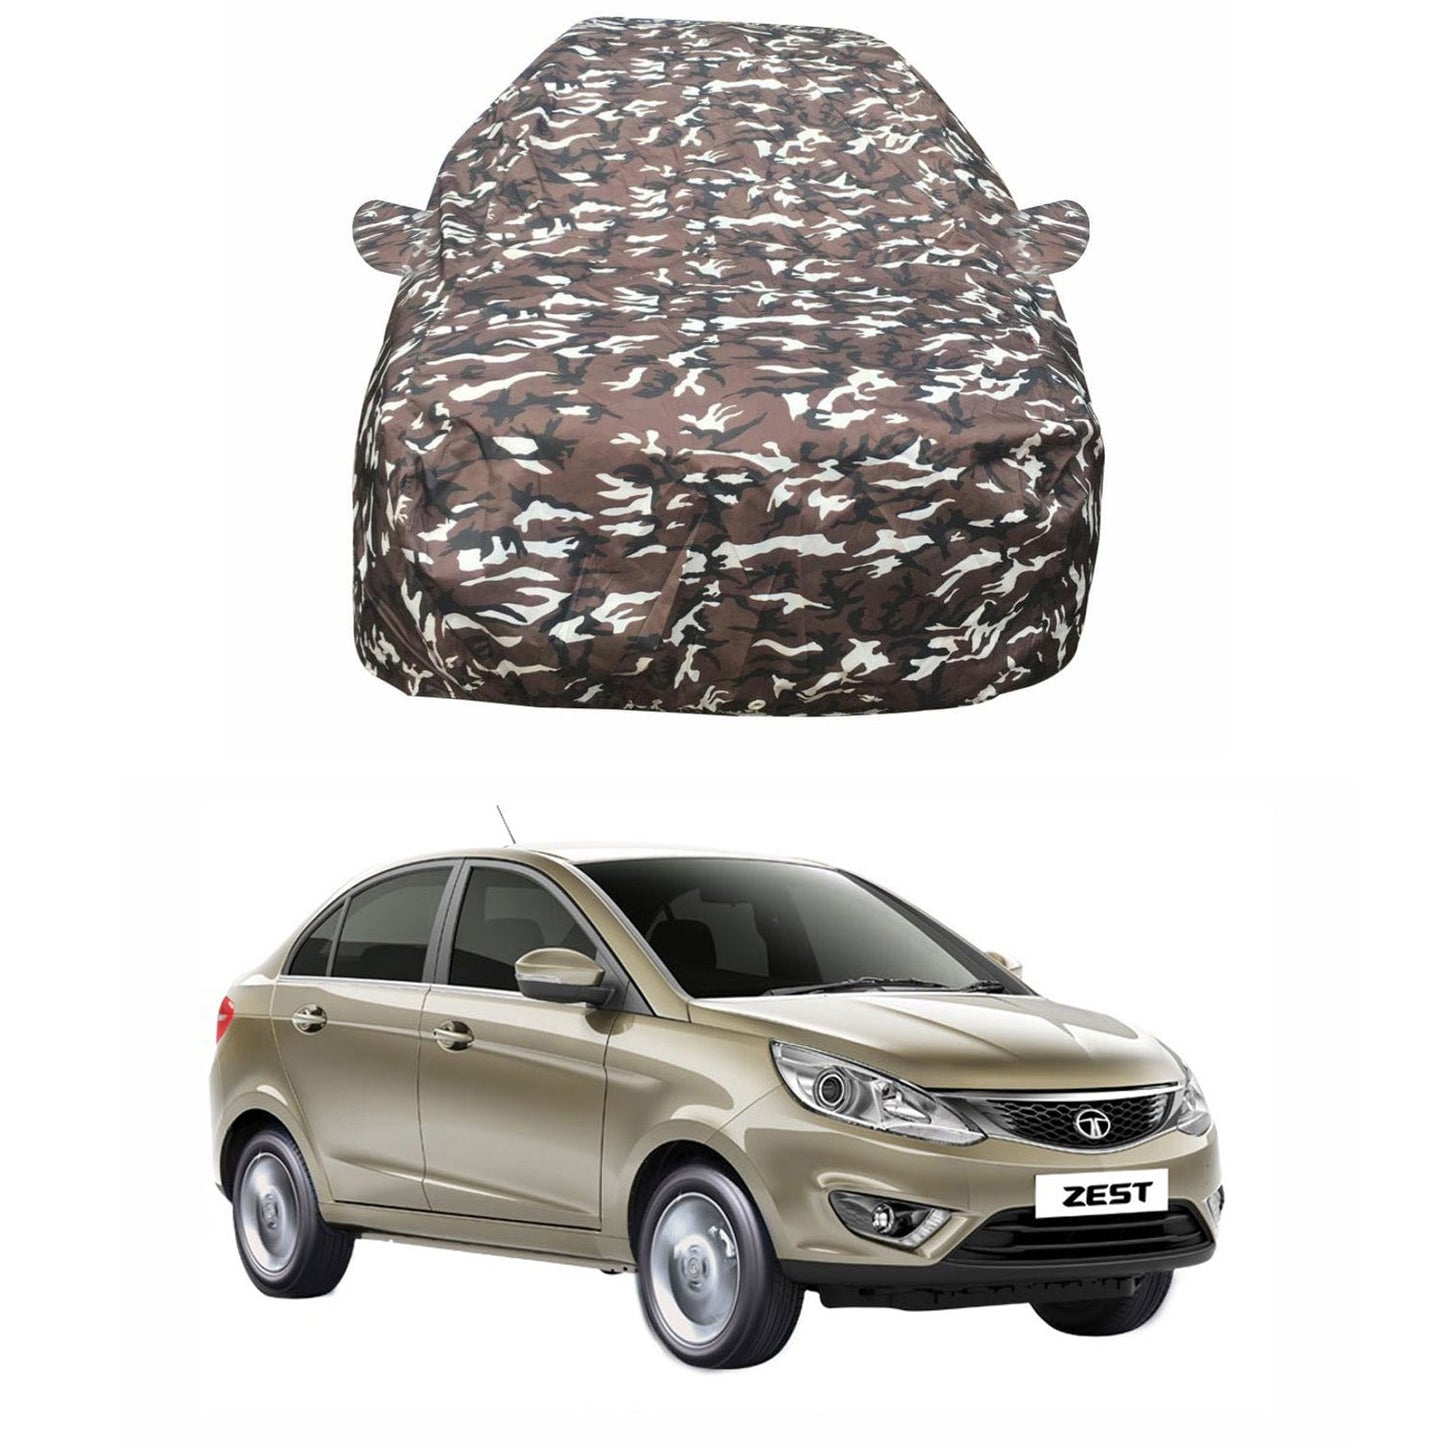 Oshotto Ranger Design Made of 100% Waterproof Multicolor Car Body Cover with Mirror Pockets For Tata Zest